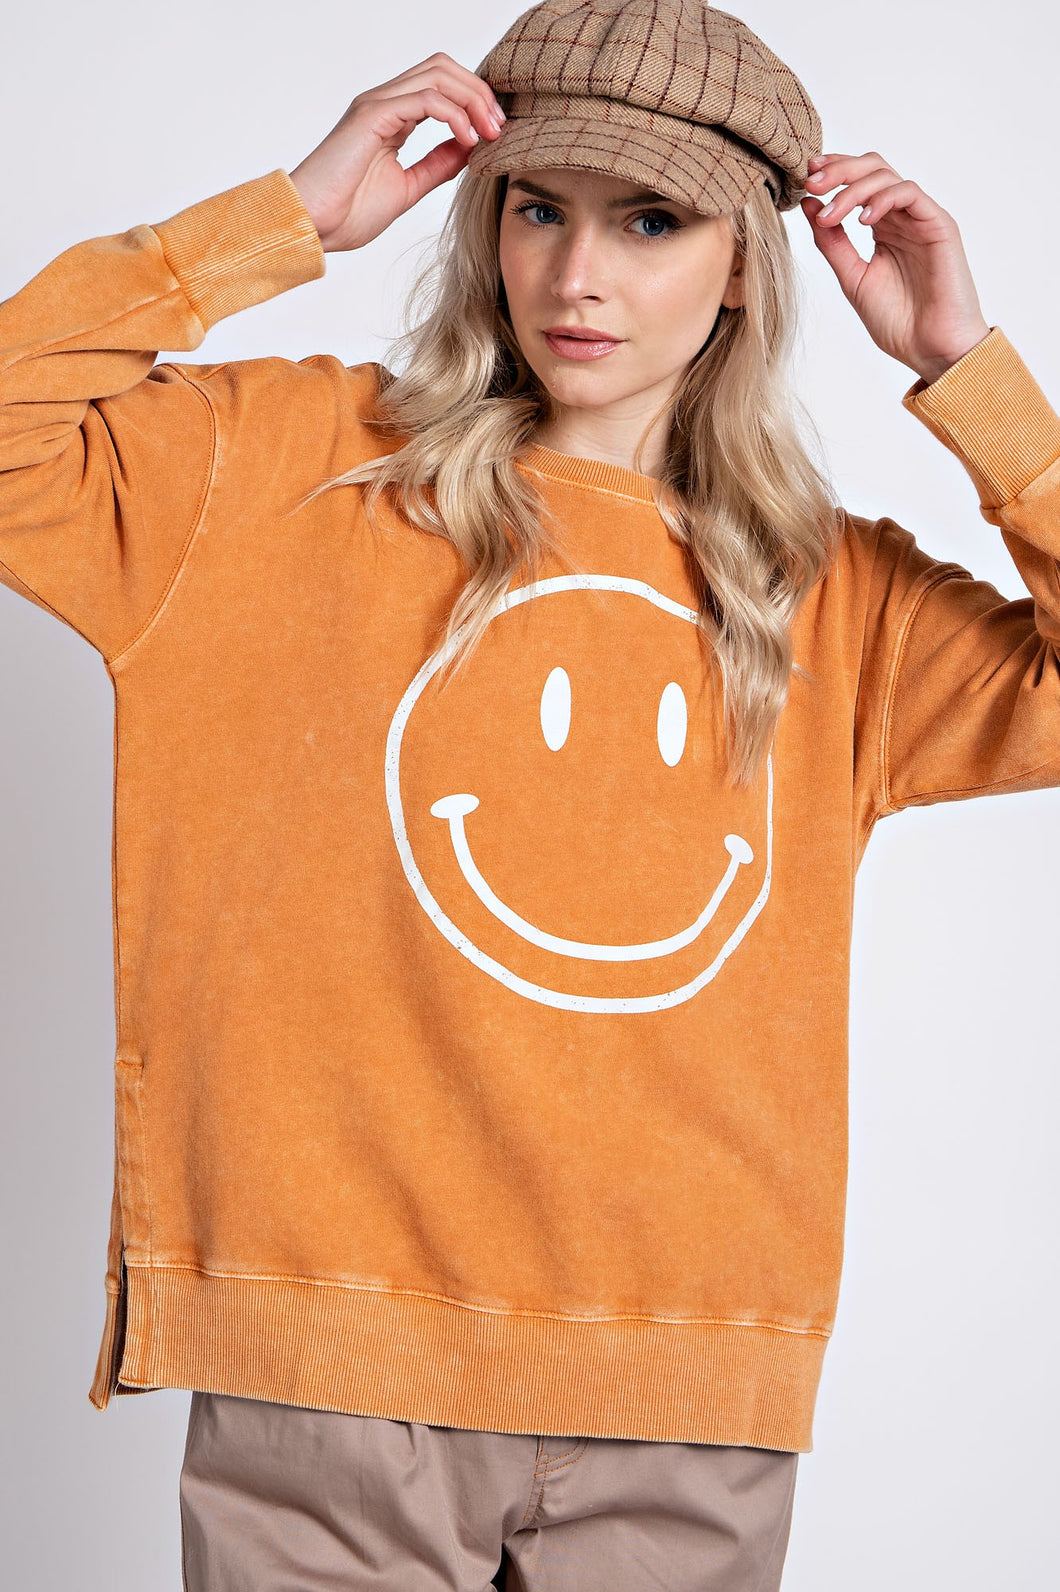 Easel Smiley Face Top in Dried Orange Shirts & Tops Easel   